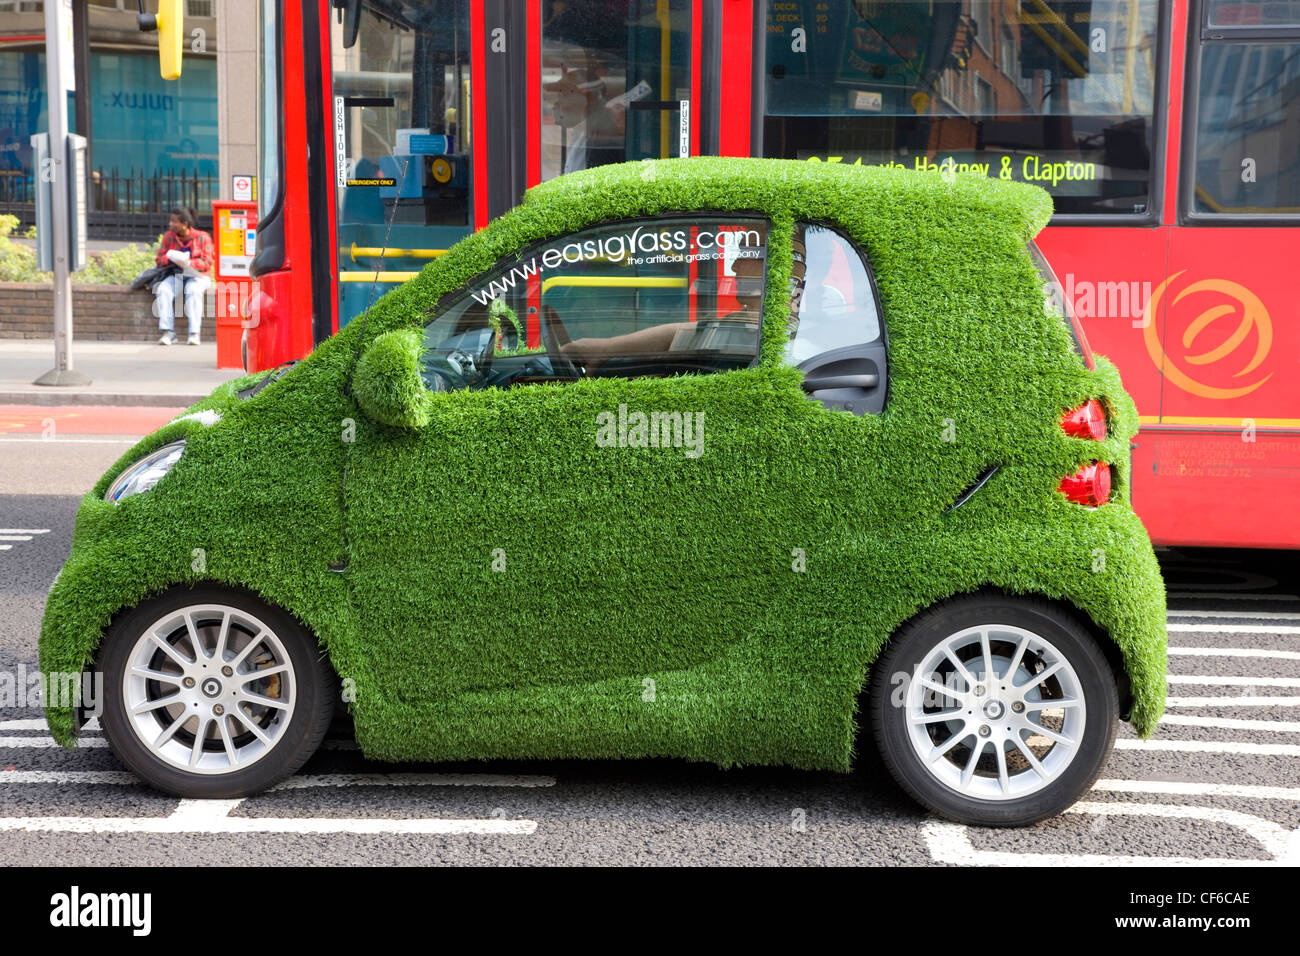 A promotional electric car covered in fake grass at traffic lights in Aldgate. Stock Photo